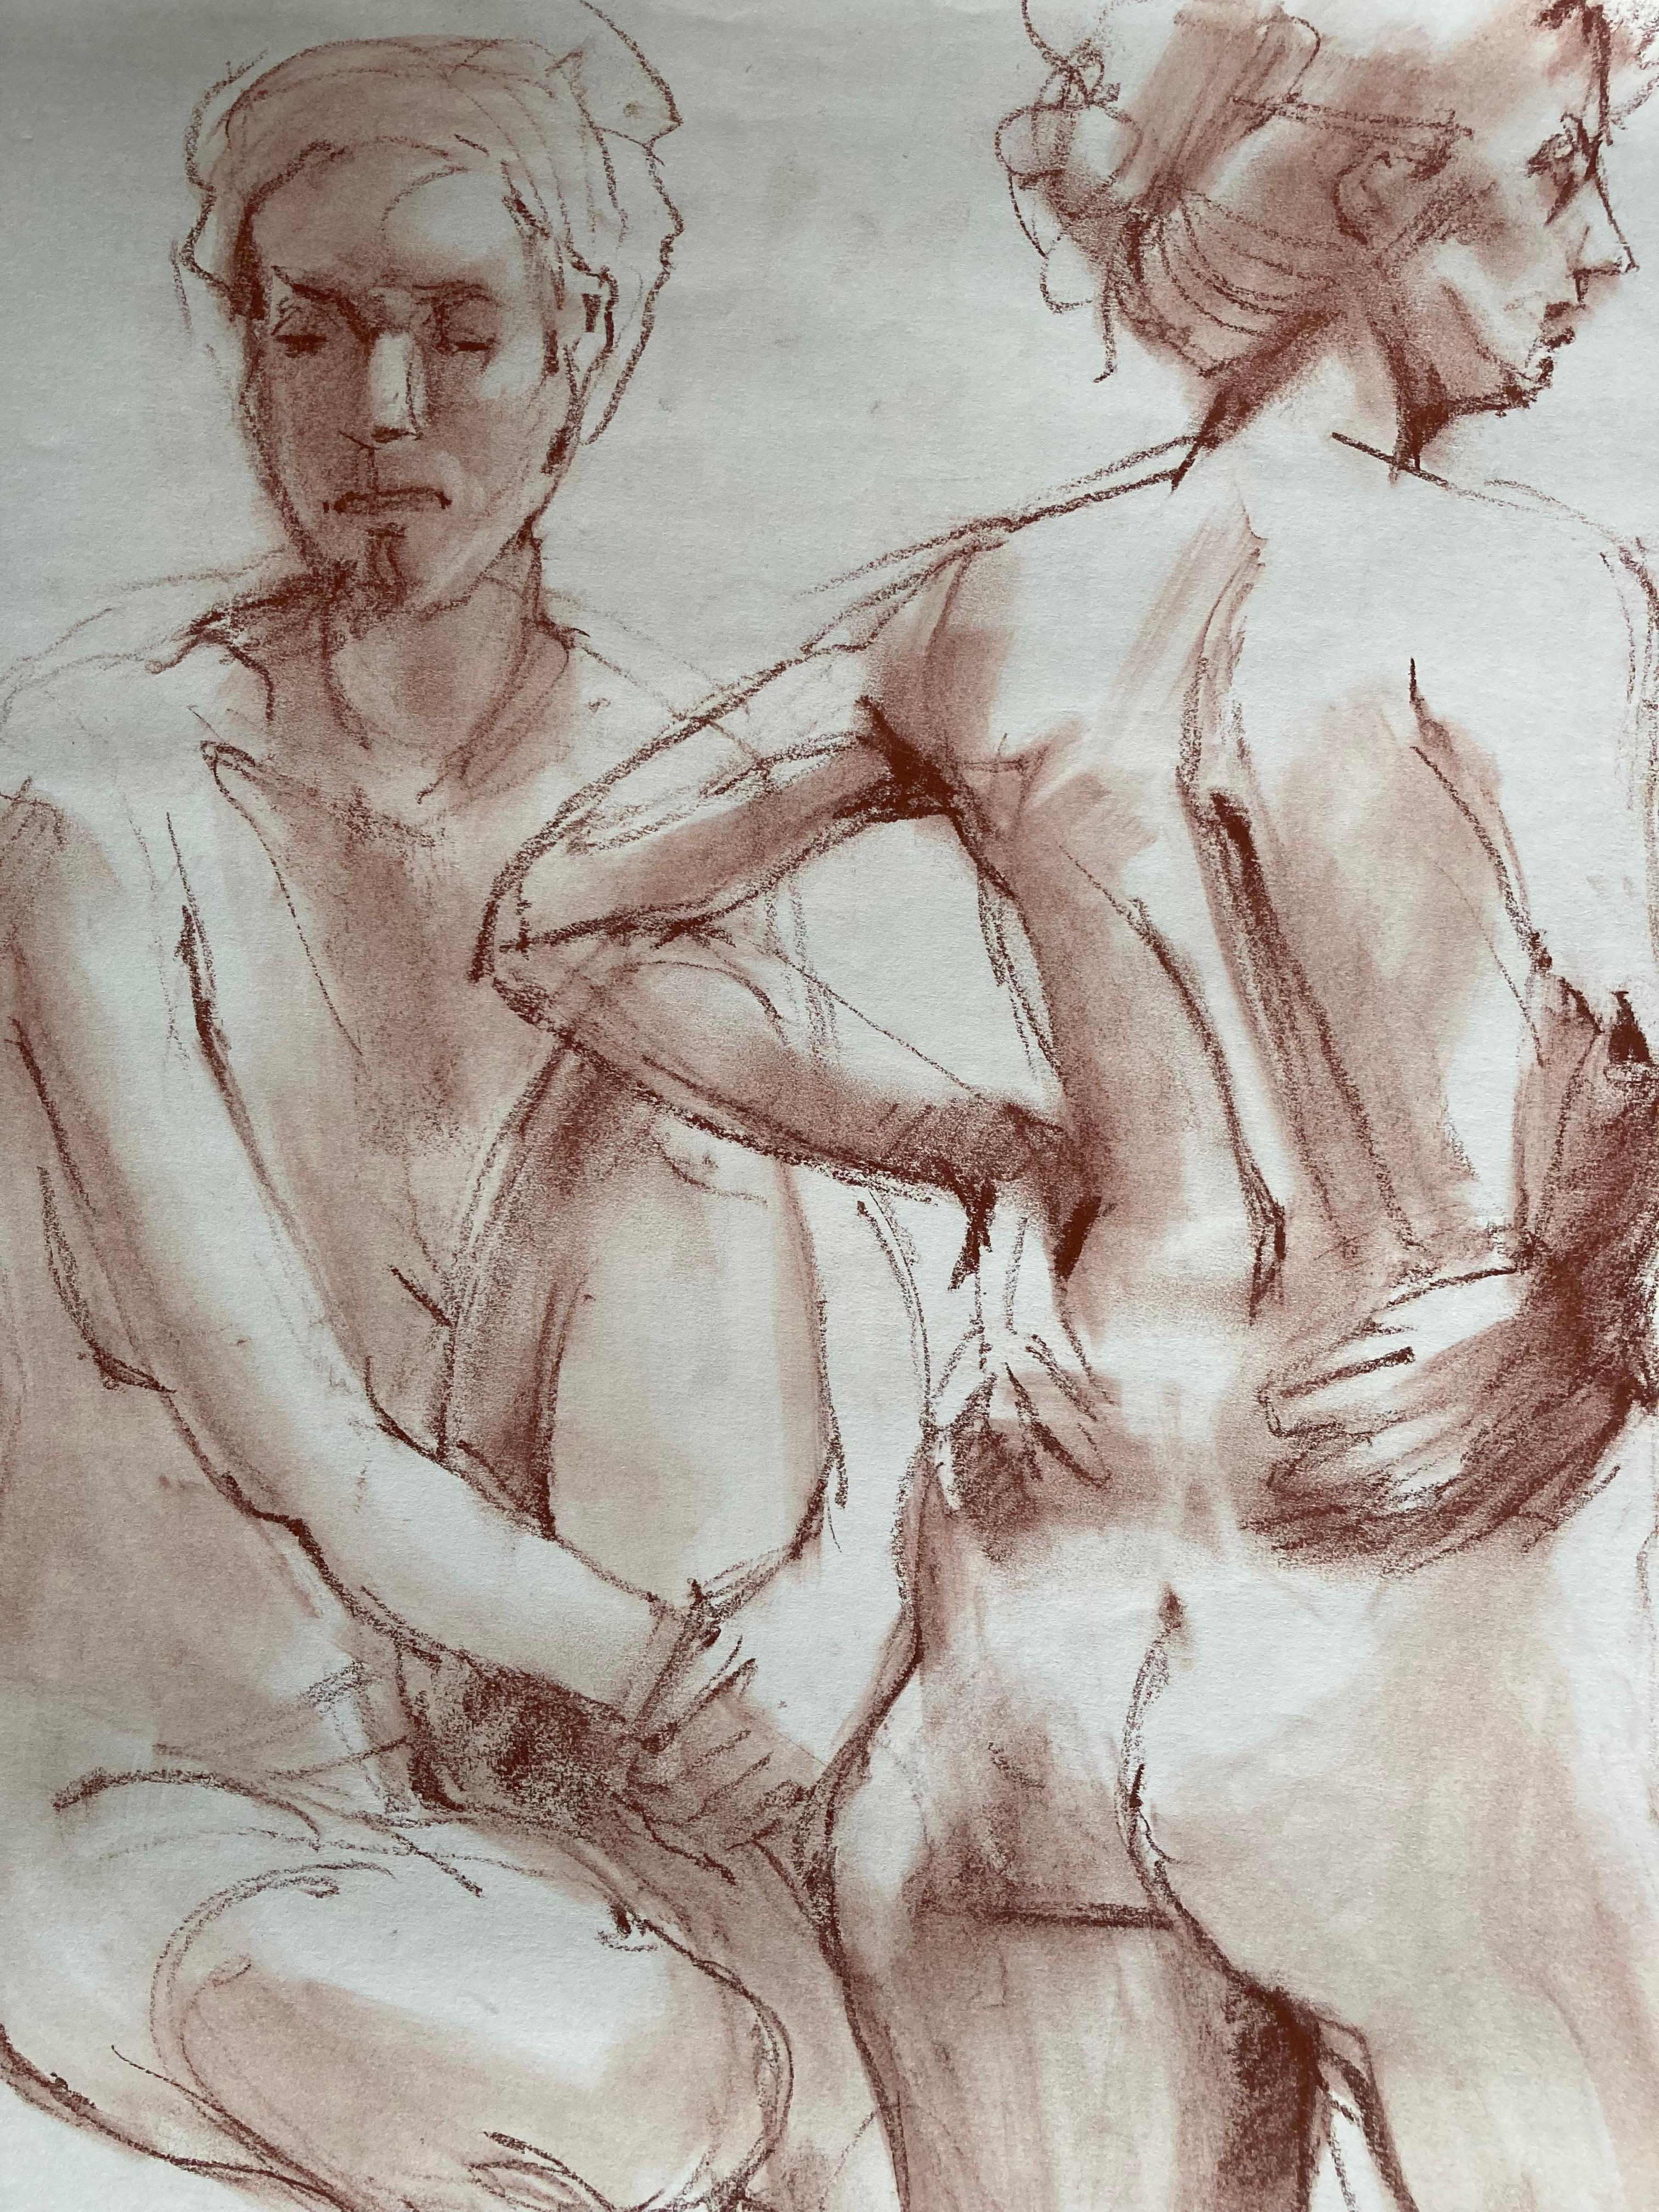 Two Women (Contemporary Female Figurative Nude Drawing)) - Art by Lue Isaac